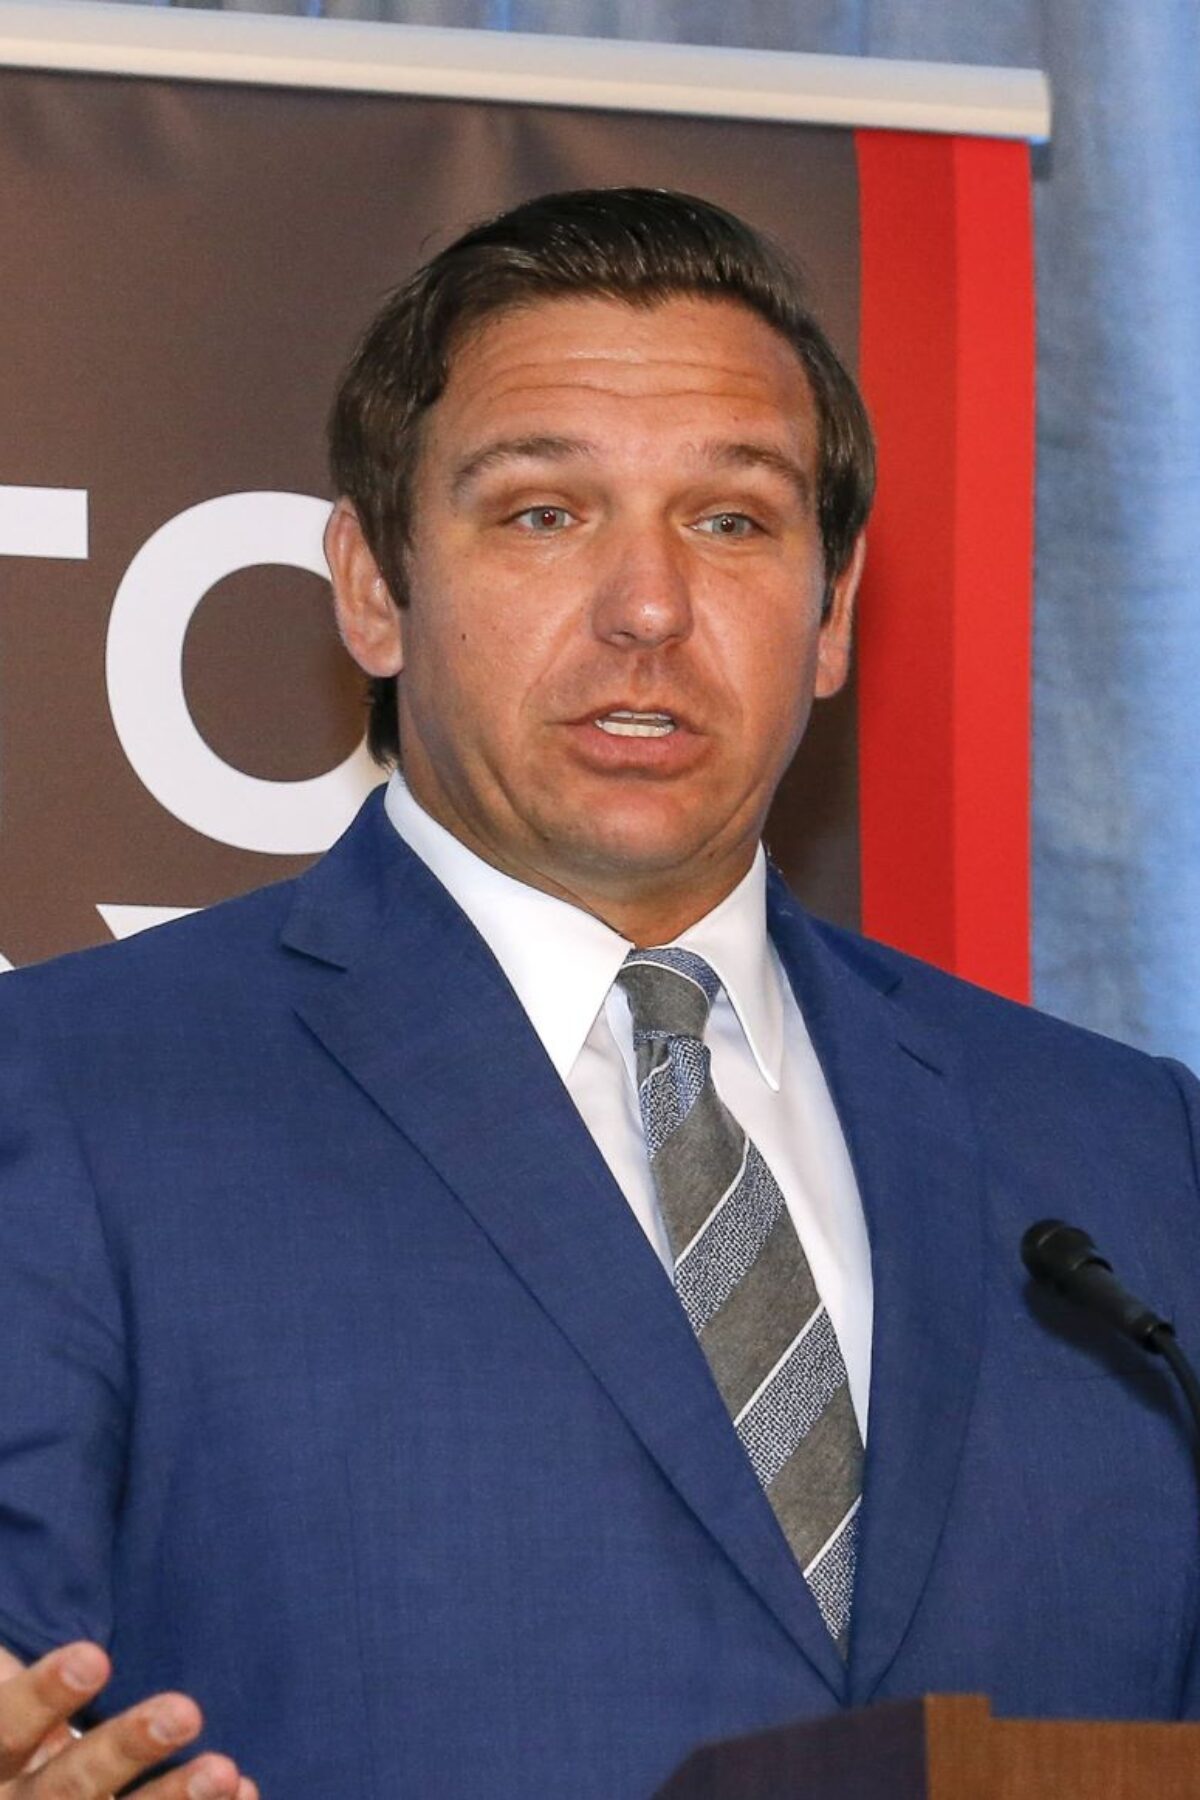 TALLAHASSEE, FL - APRIL 23: Florida Governor Ron DeSantis addresses the audience of the first of a series of 